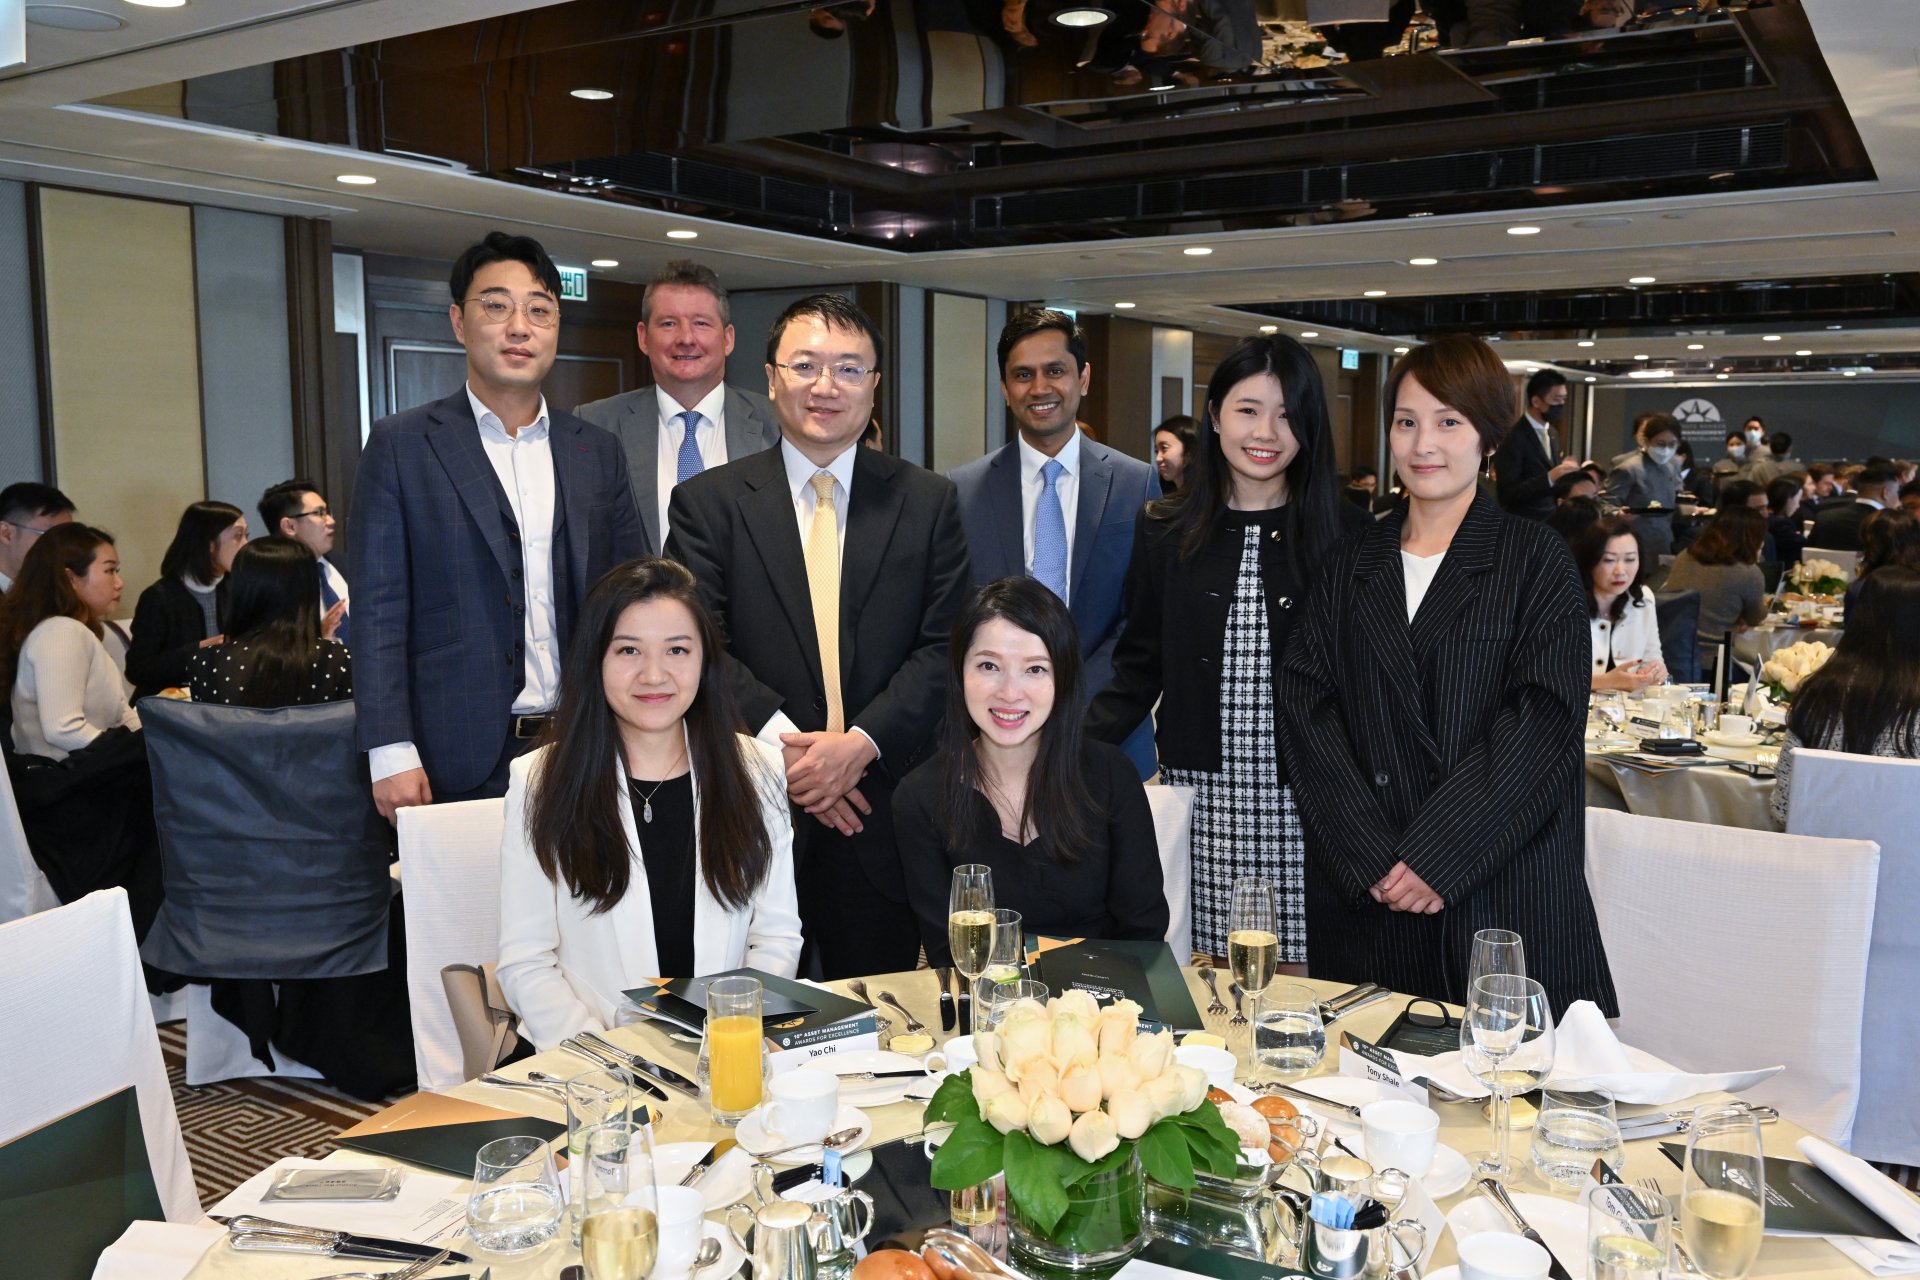 Nomura Asset Management and VIP guests - Tommy Dong of CITIC, Tracy Ma of BEA and Amit Singh of Carret Private